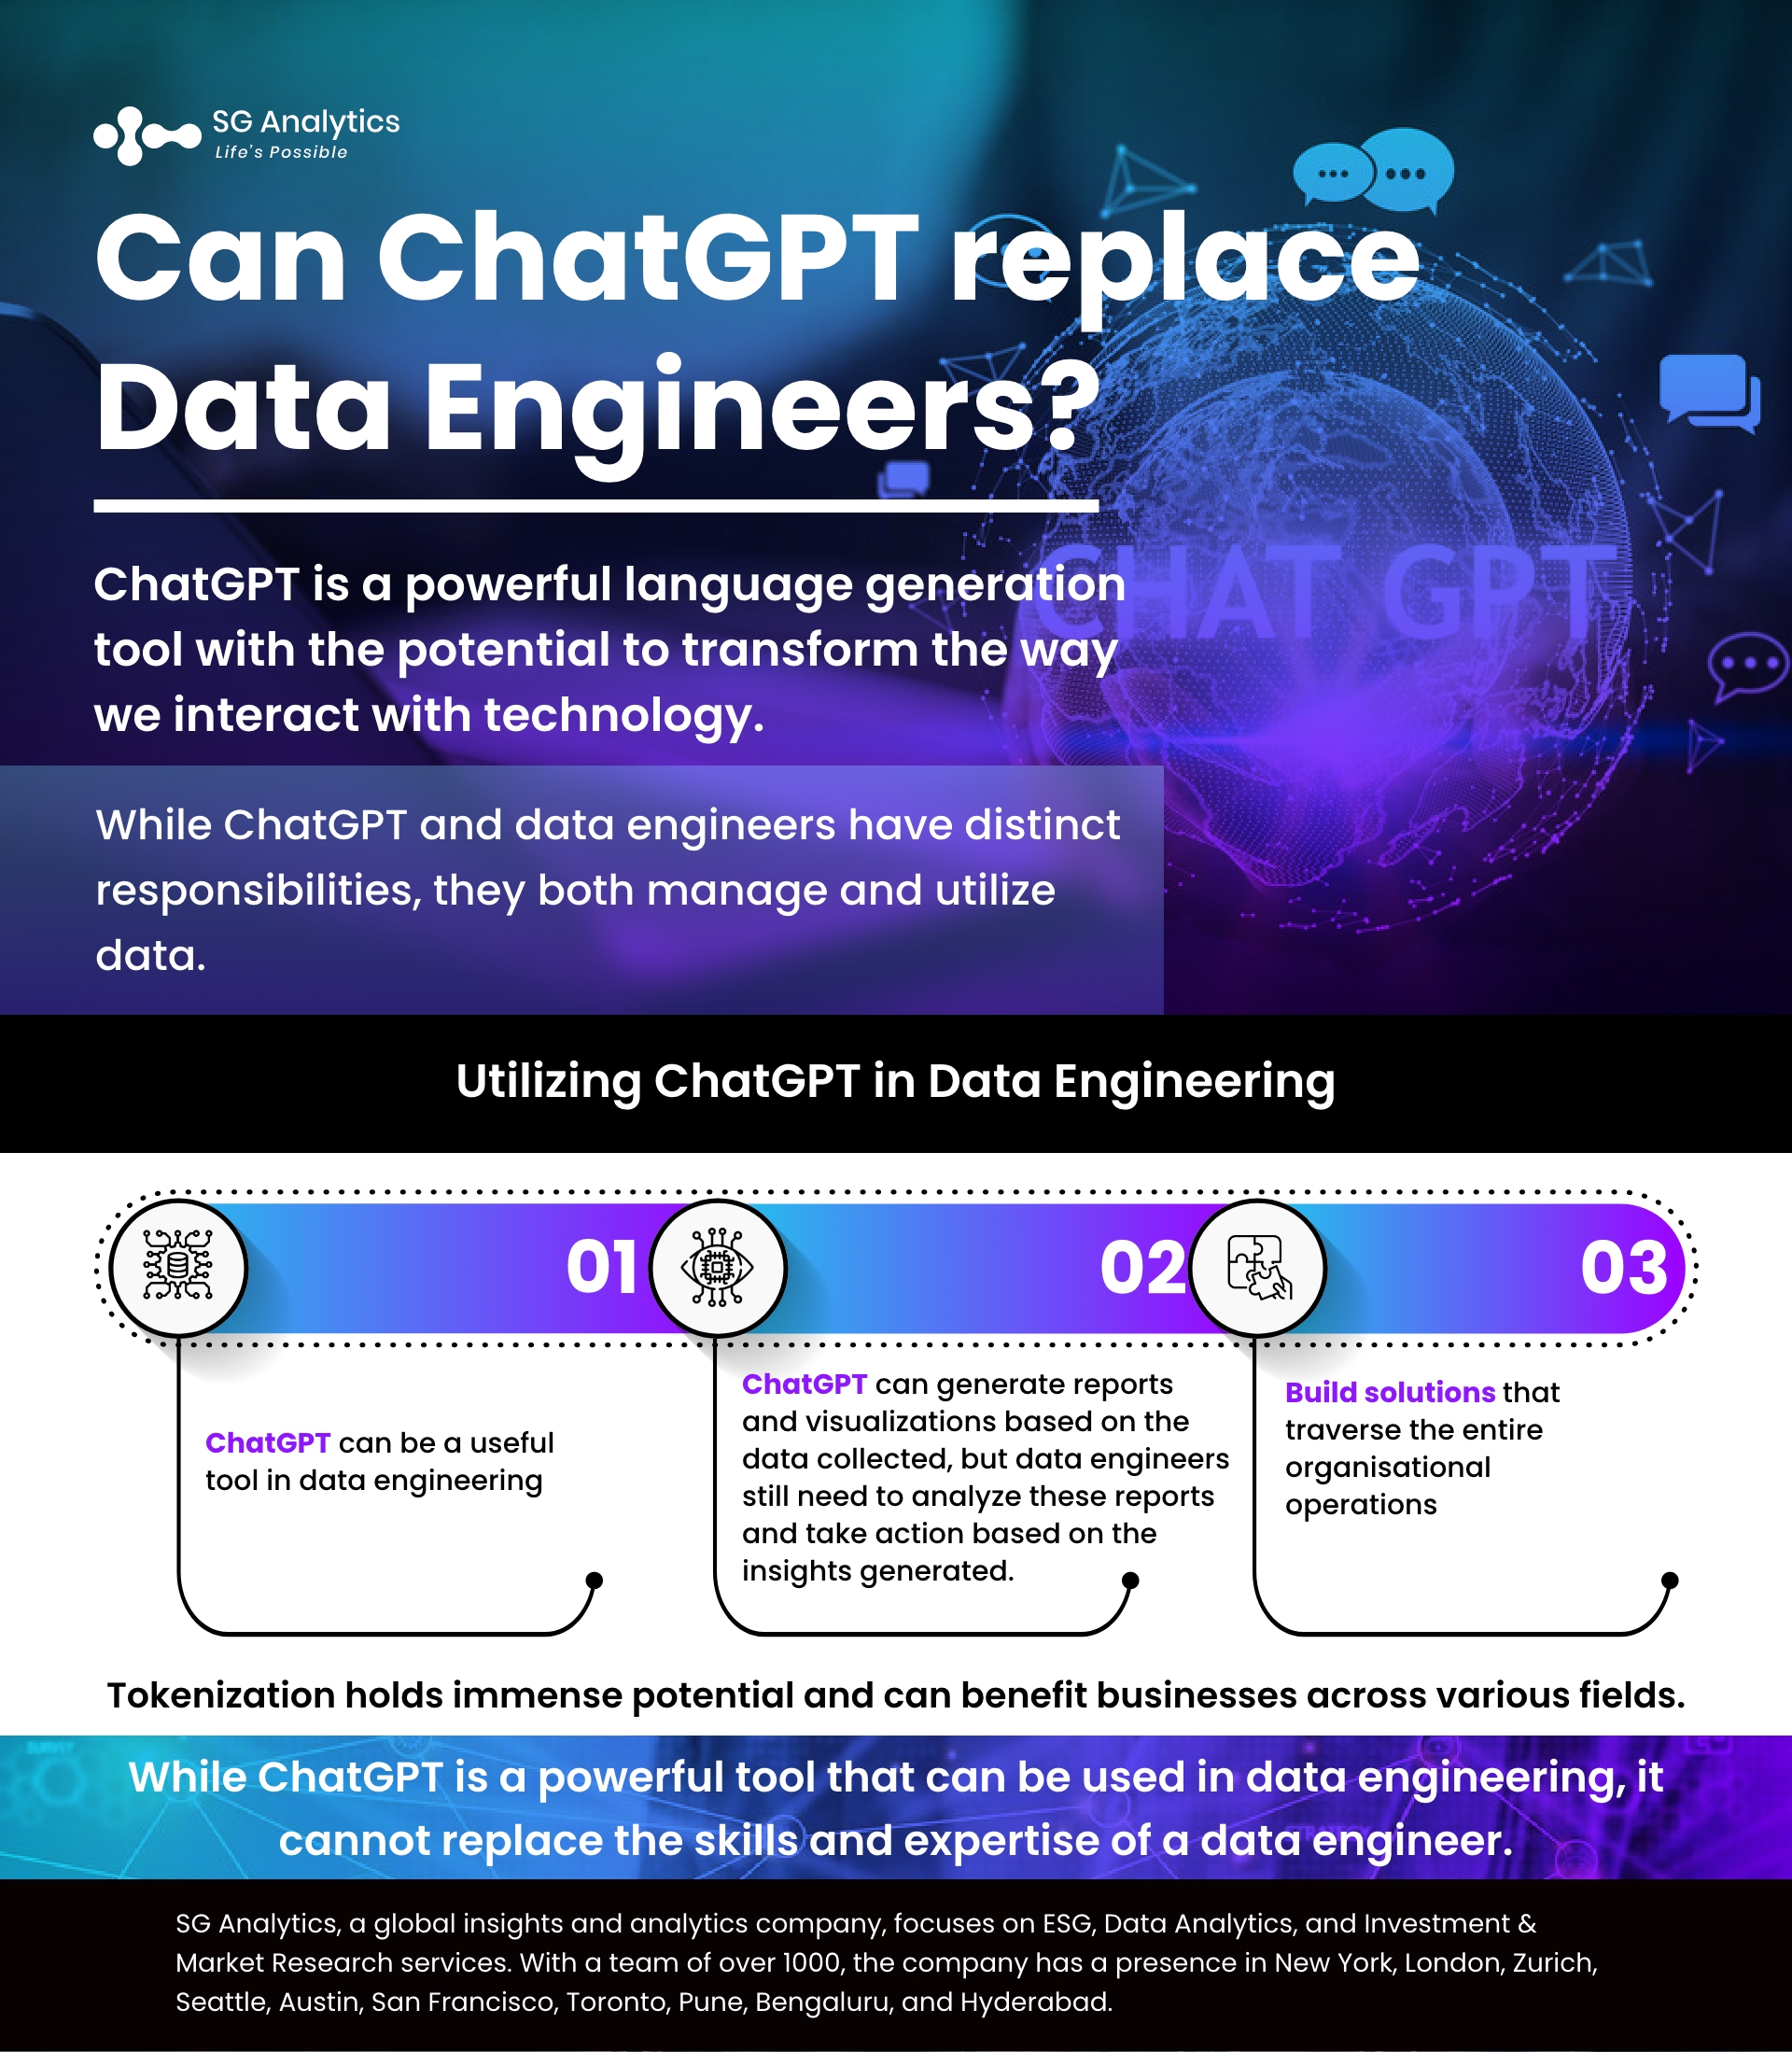 Can ChatGPT replace Data Engineers